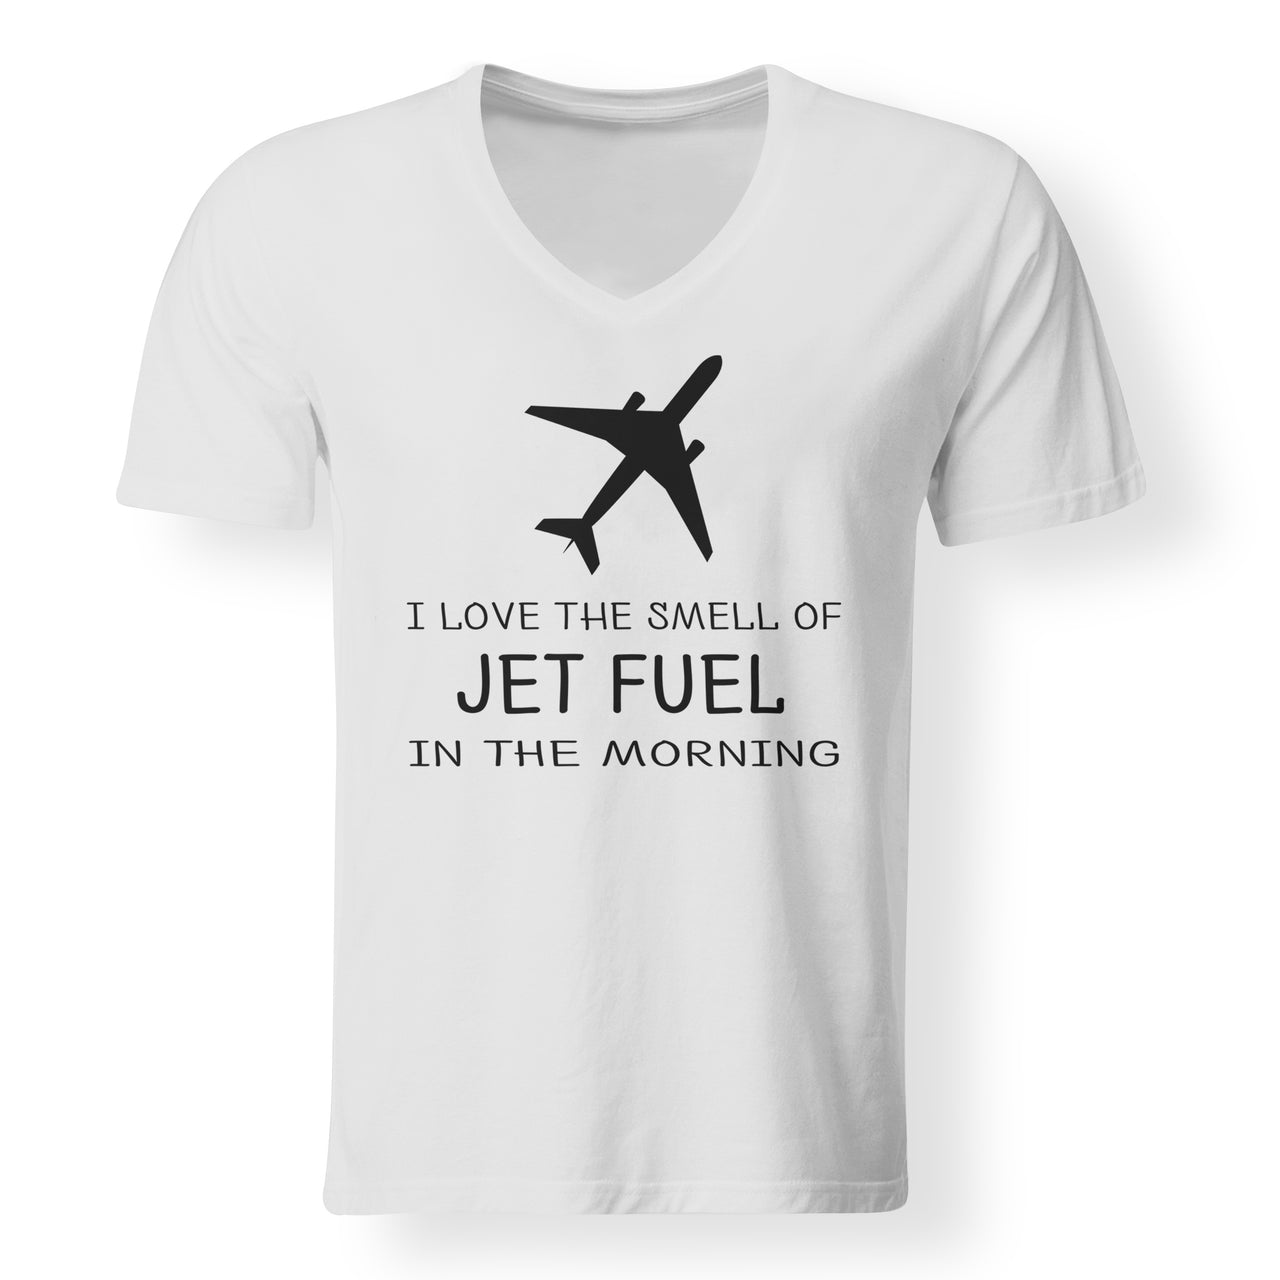 I Love The Smell Of Jet Fuel In The Morning Designed V-Neck T-Shirts